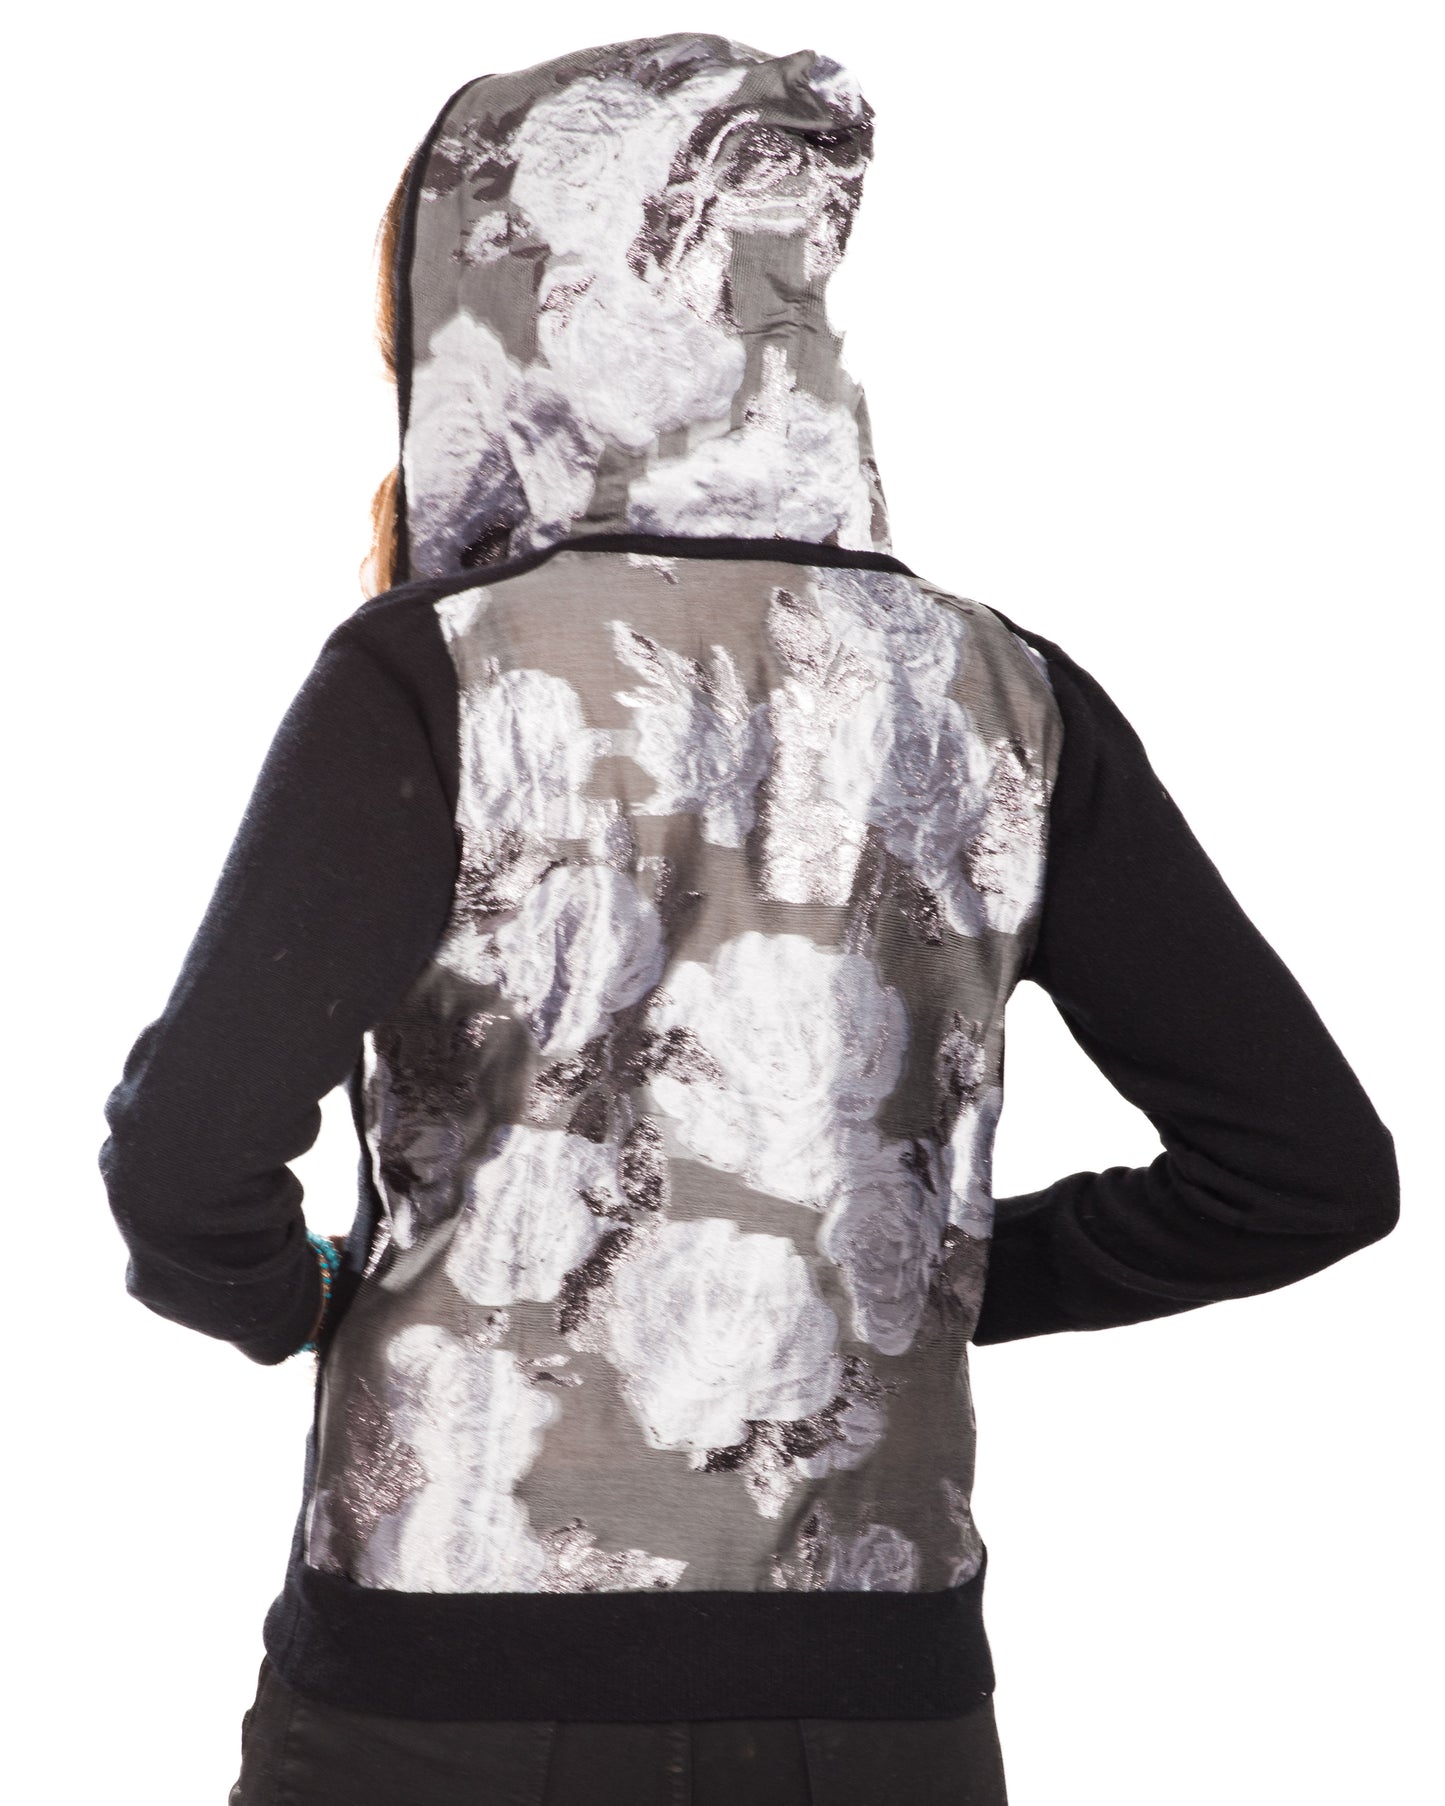 MEDIUM BLACK LONG SLEEVE CASHMERE HOODIE WITH BACK AND HOOD OF SILVER ROSES ON SLATE SILK ORGANZA